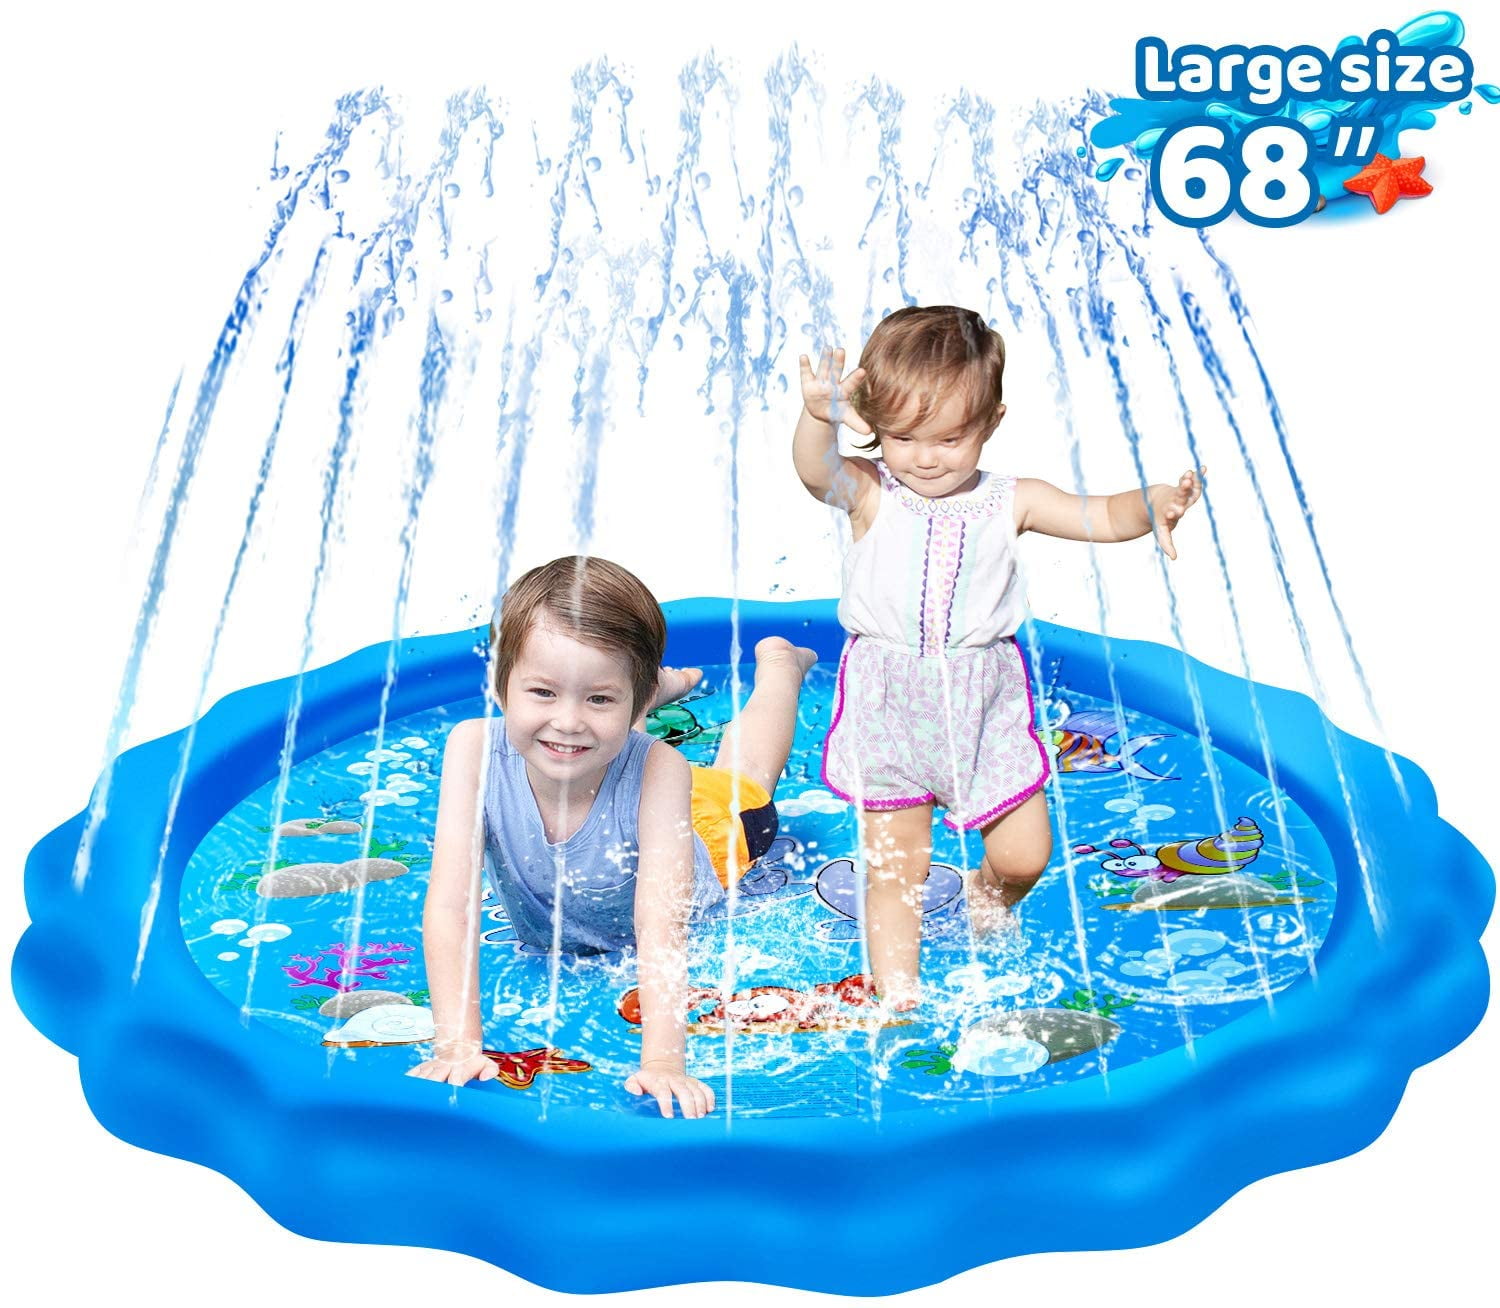 Details about   Kids Sprinklers Pad Outdoor Splash Toddlers Baby Pool 68 In Water Toys Gifts Mat 